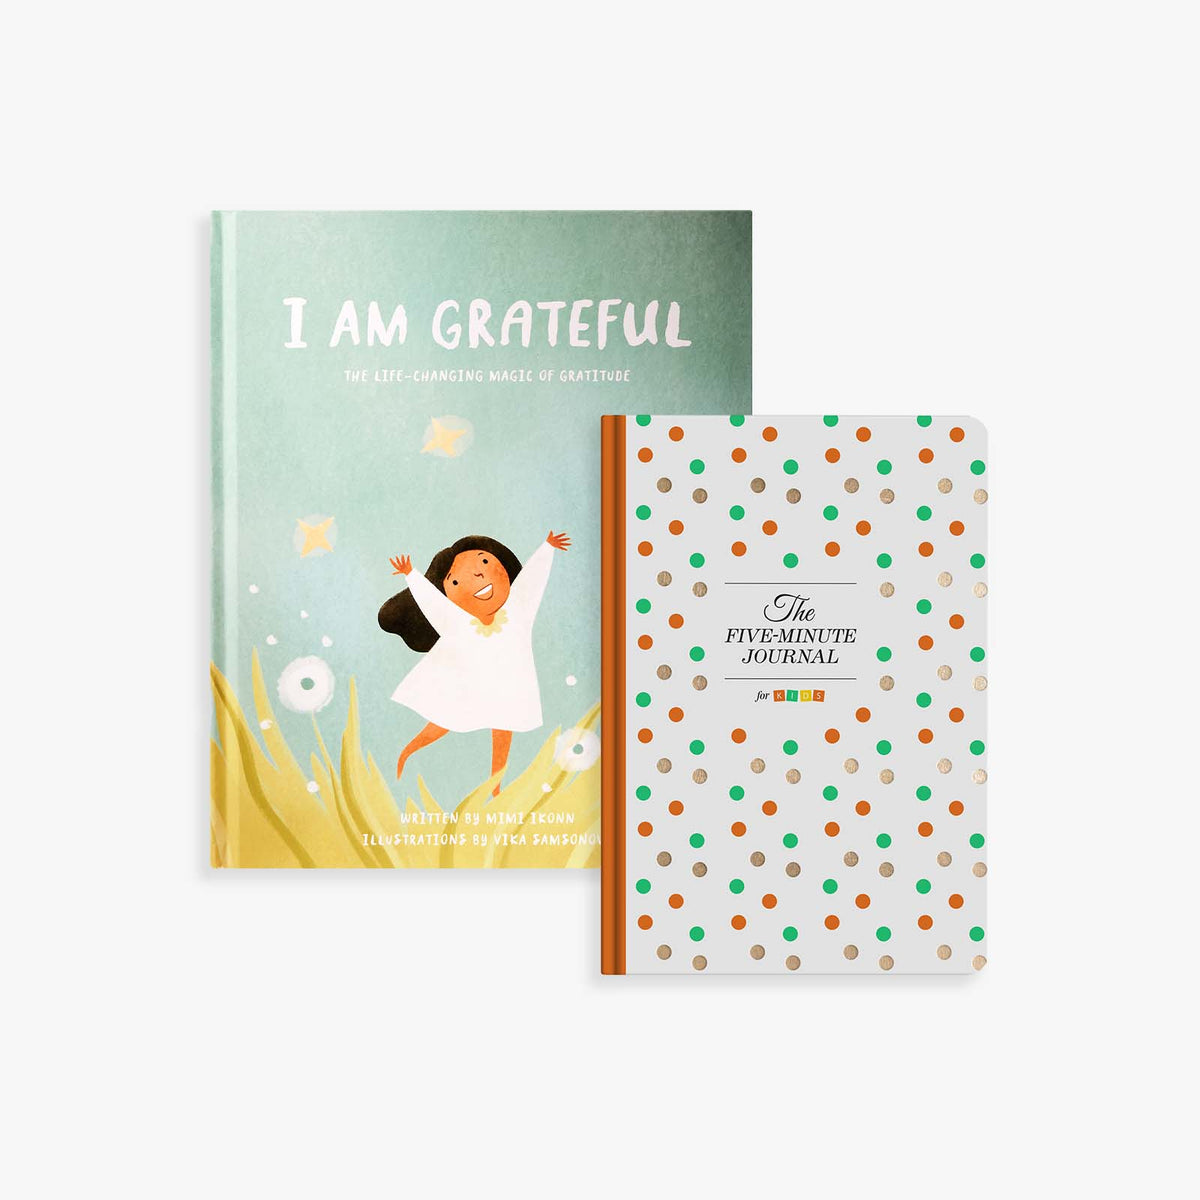 I'm A Grateful Girl: 5 Minute Daily Gratitude Journal For Girls With  Prompts (Kids Gratitude Journal): Kids Inc Press: 9781692742270:  : Books